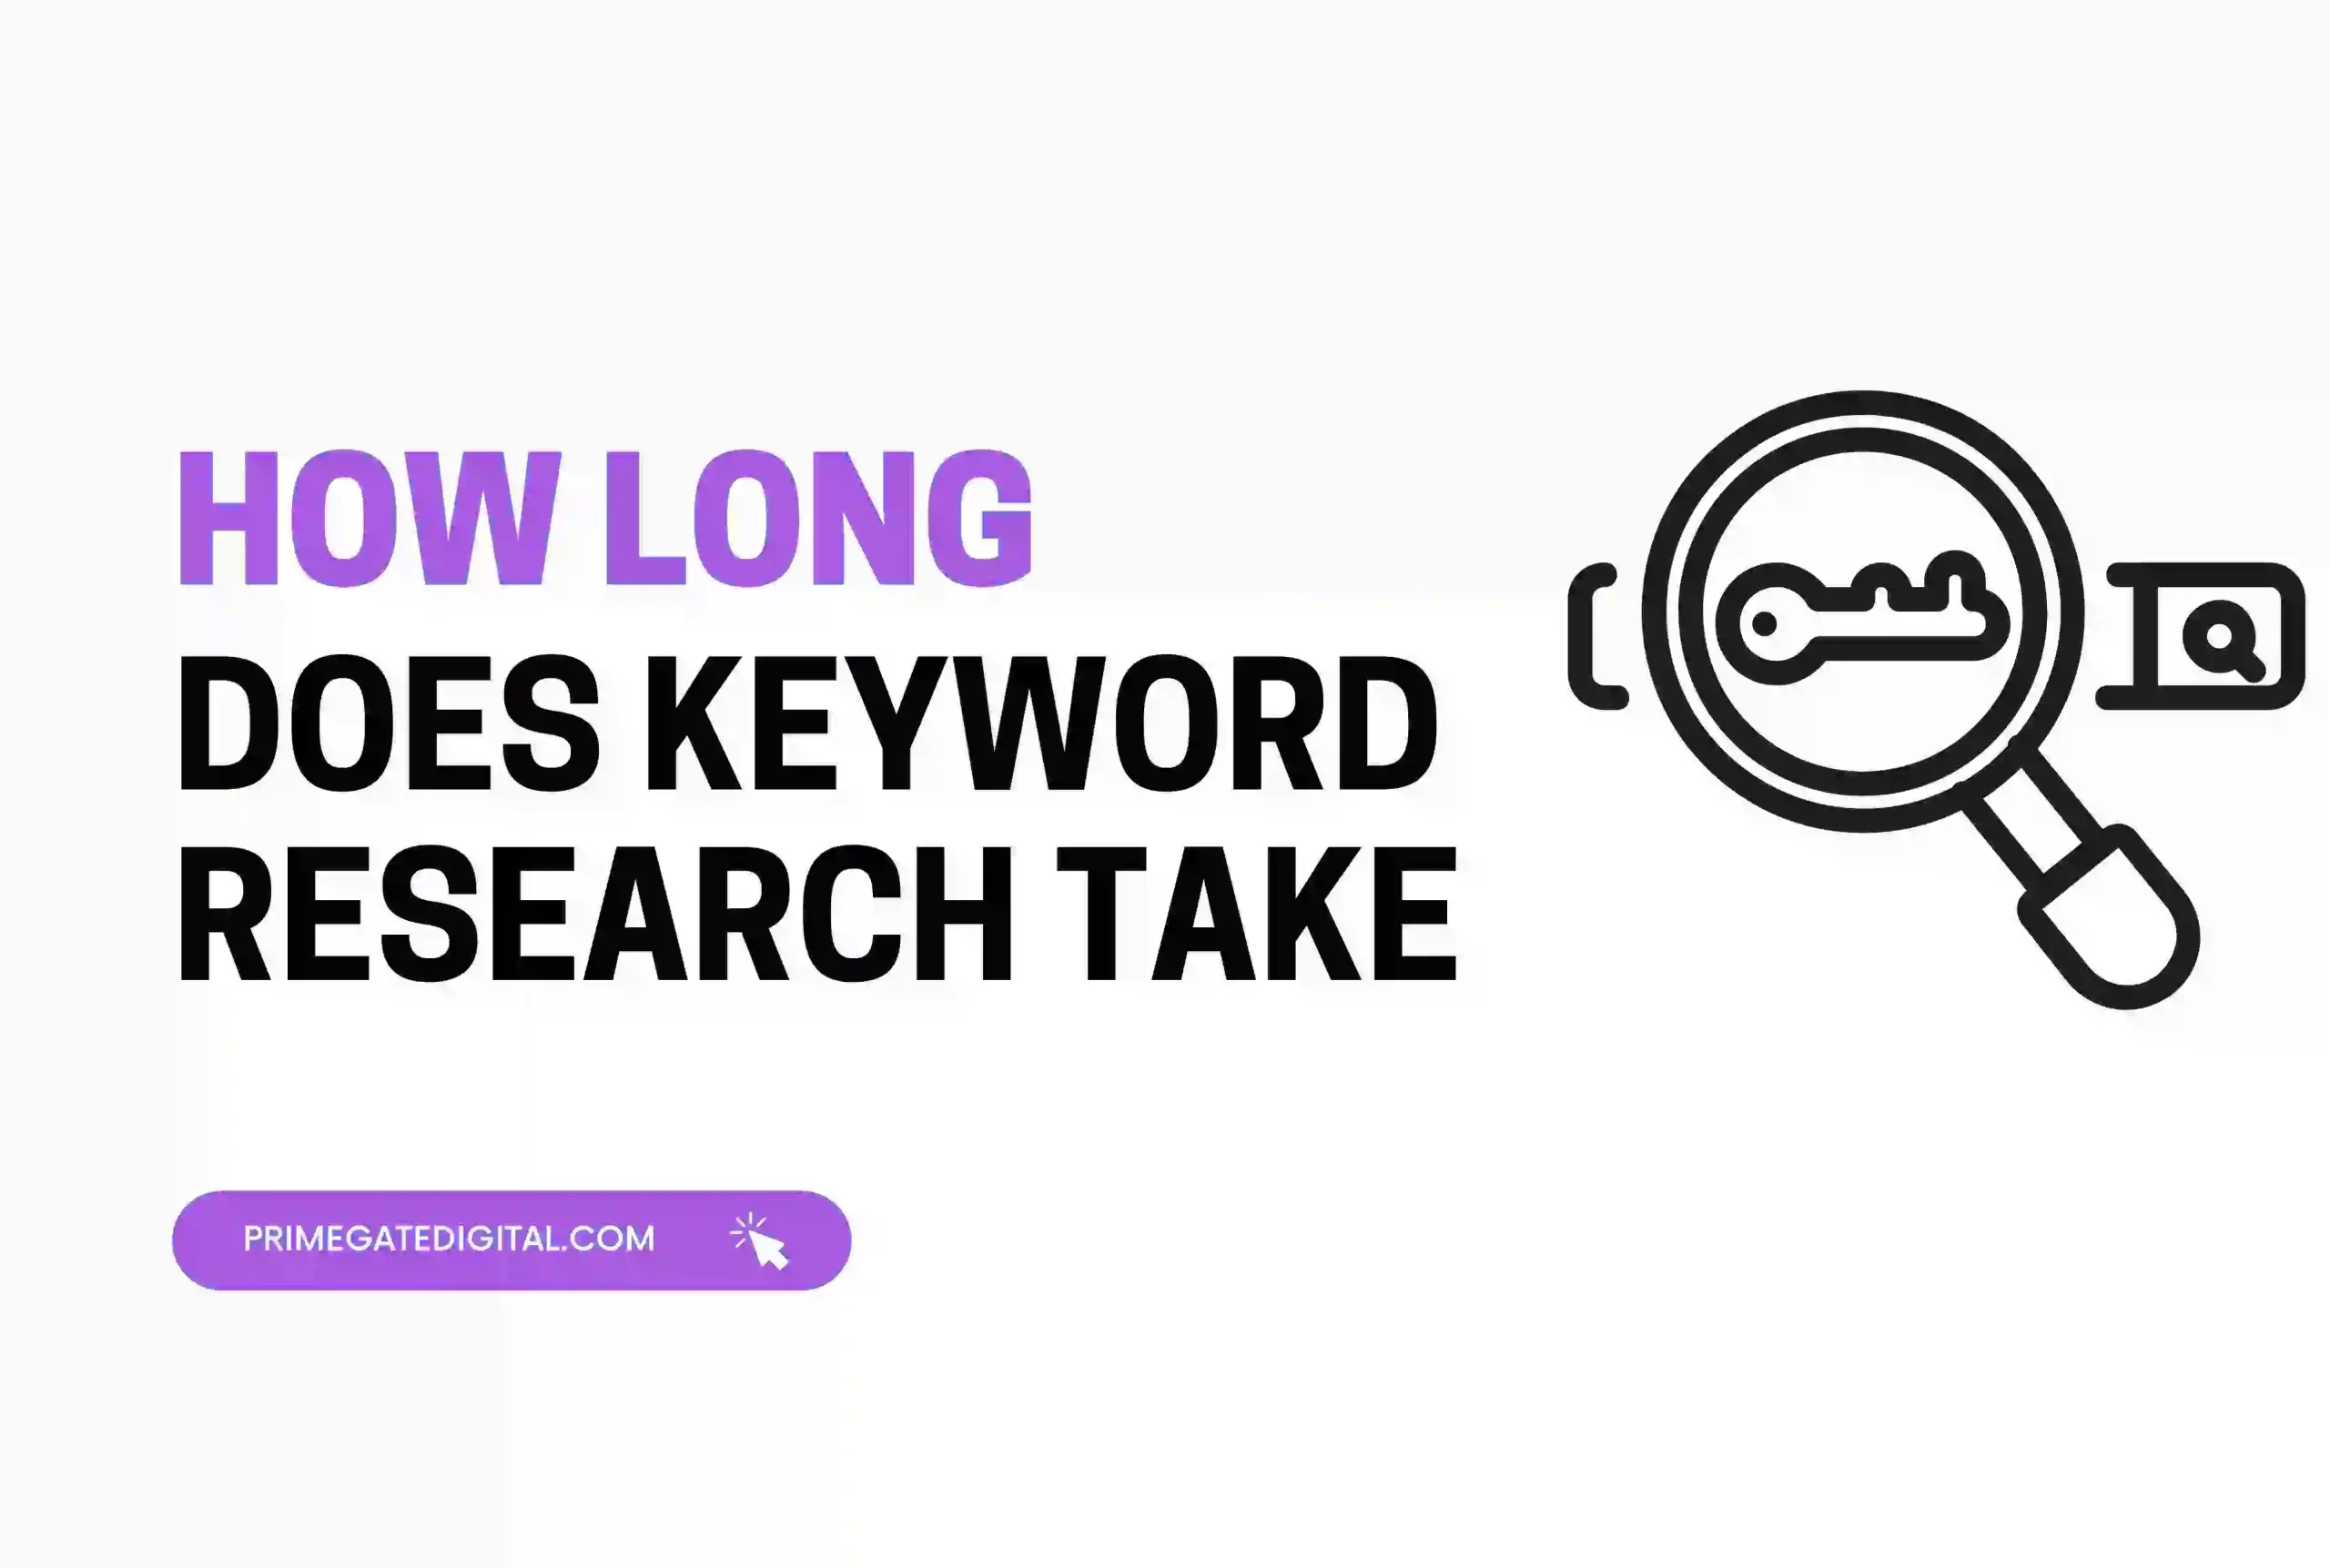 How Long Does Keyword Research Take